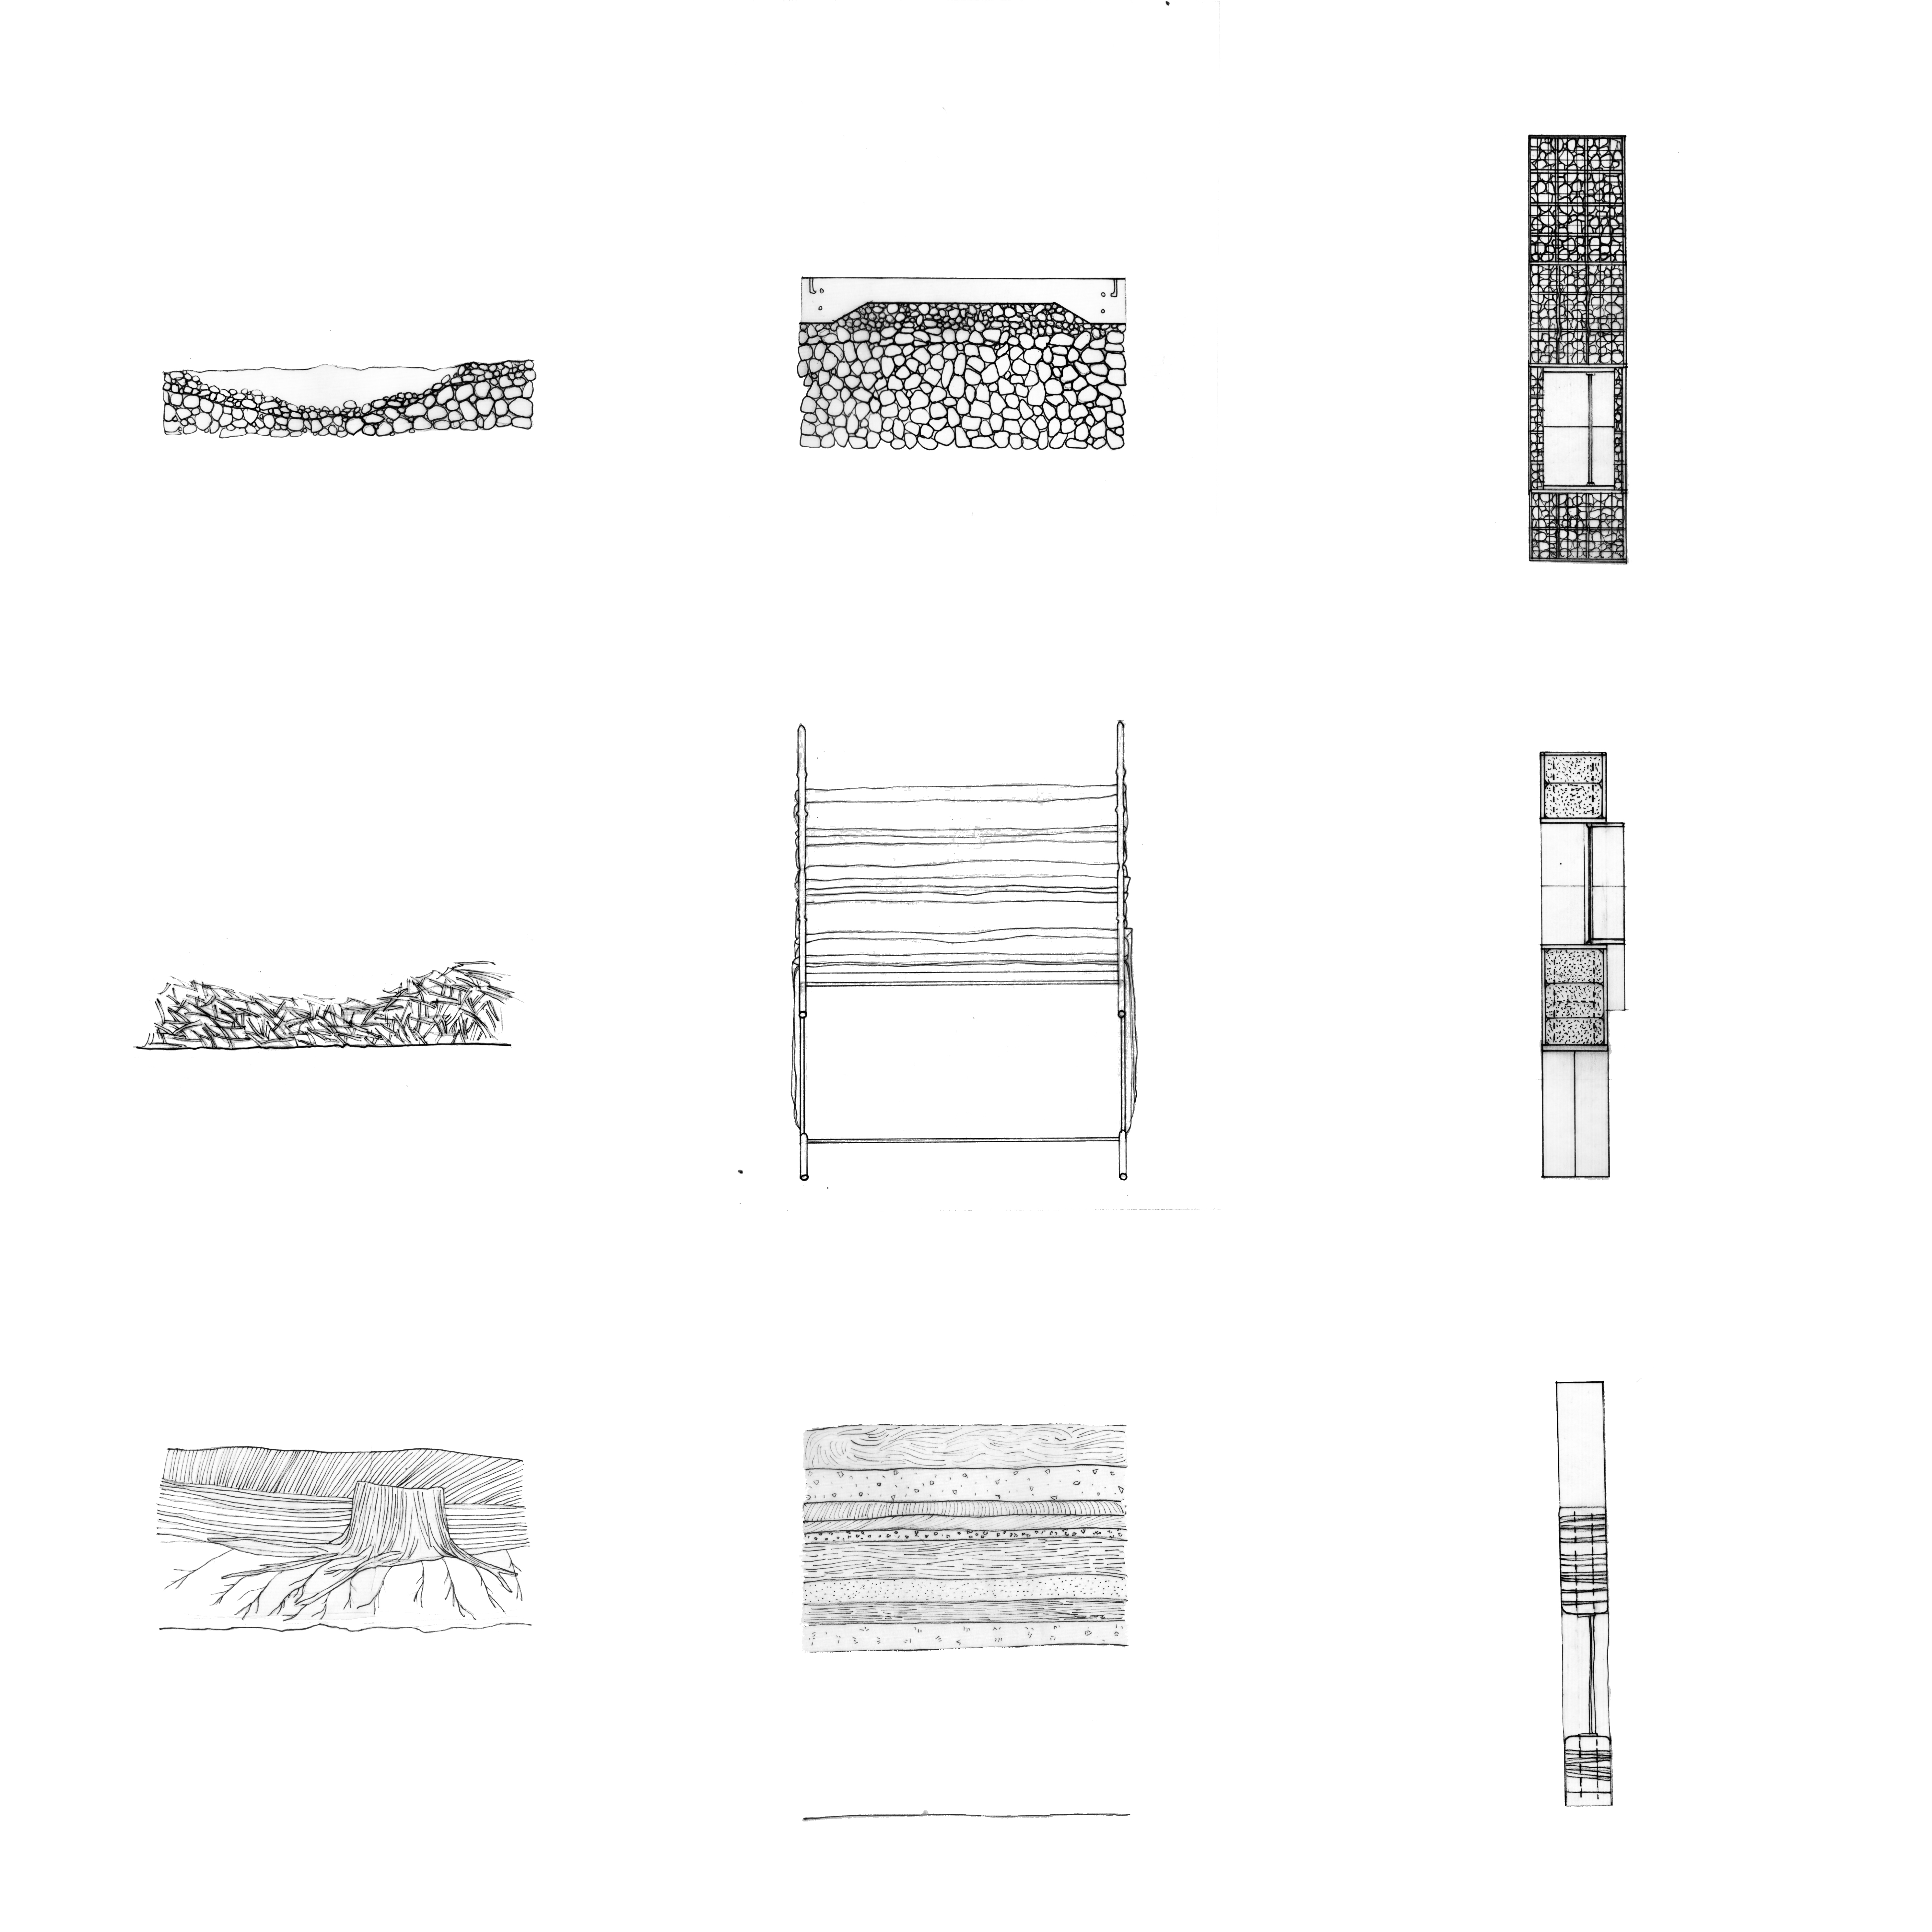 A grid of nine different black and white architectural sketches. The top row depicts beds of gravel, the second row, beds of straw, the third row beds of dirt.